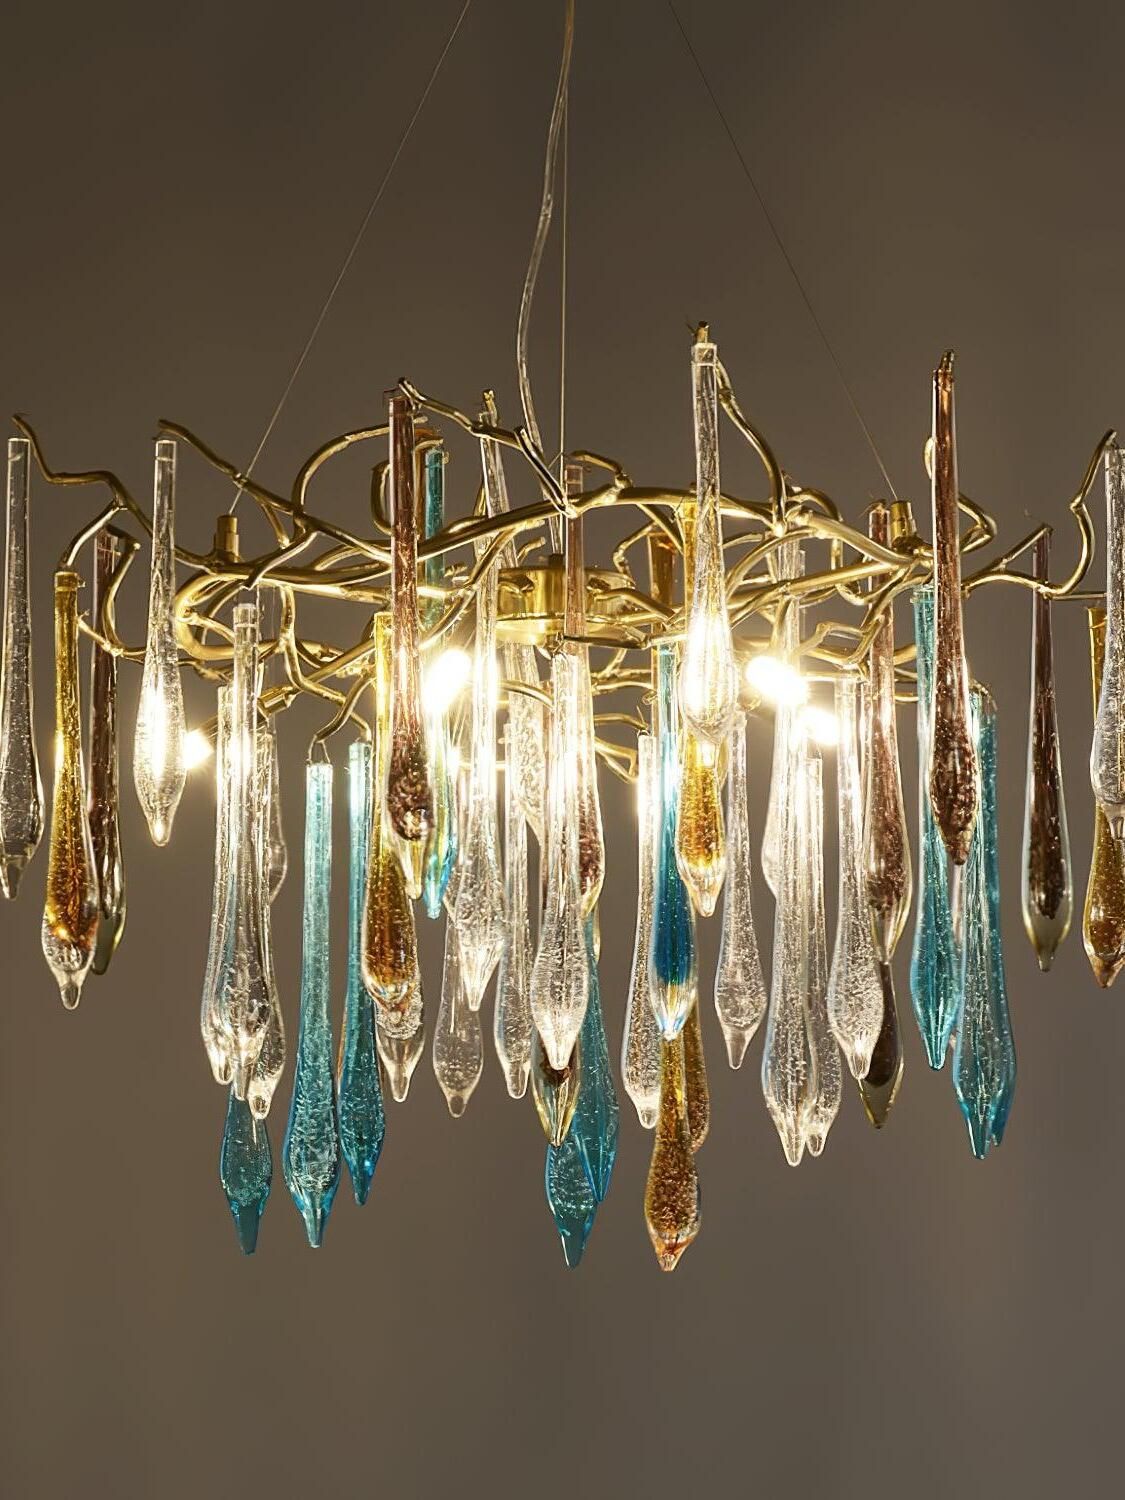 6 Chandeliers : 6 Stunning Chandeliers to Elevate Your Home Decor